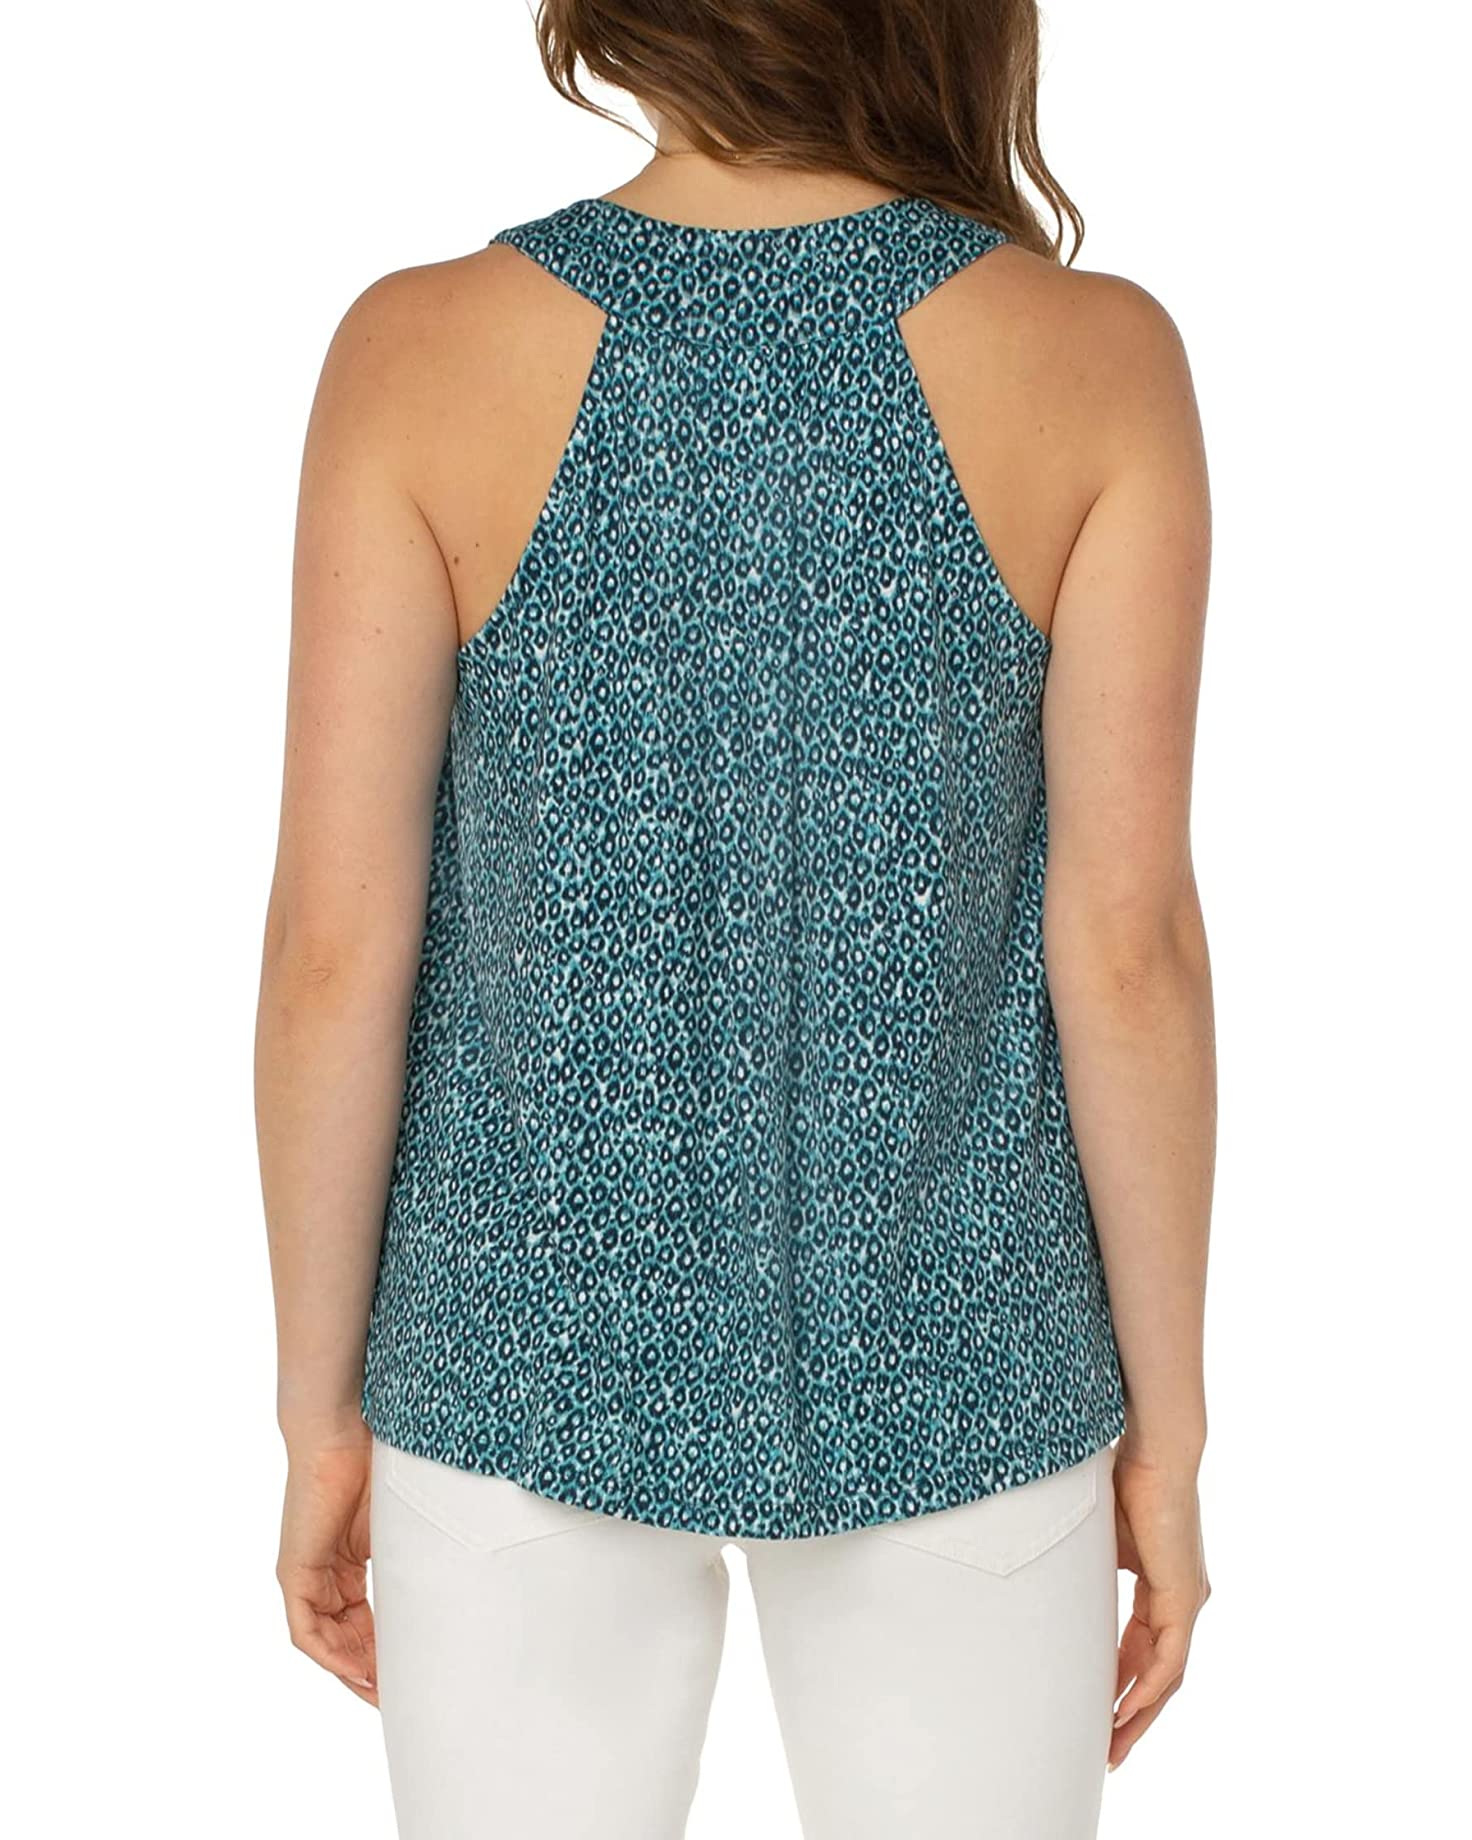 Pleated Front Sleeveless Top